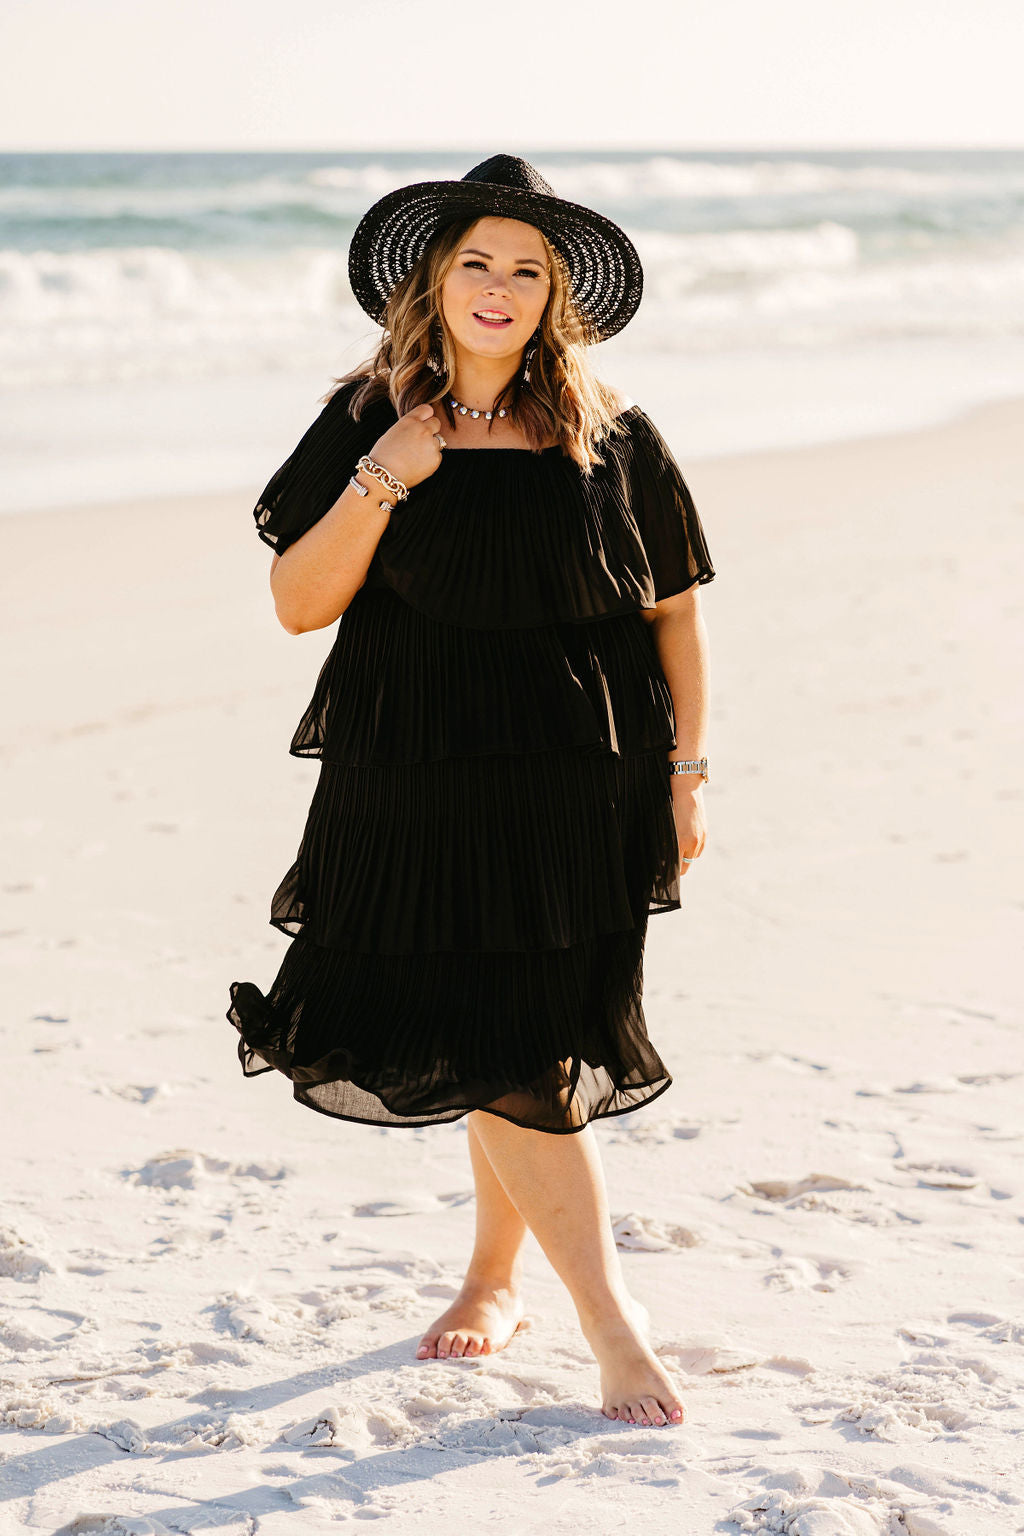 Throwing Shade Wide Brim Hat with Black Band in Black - Giddy Up Glamour Boutique